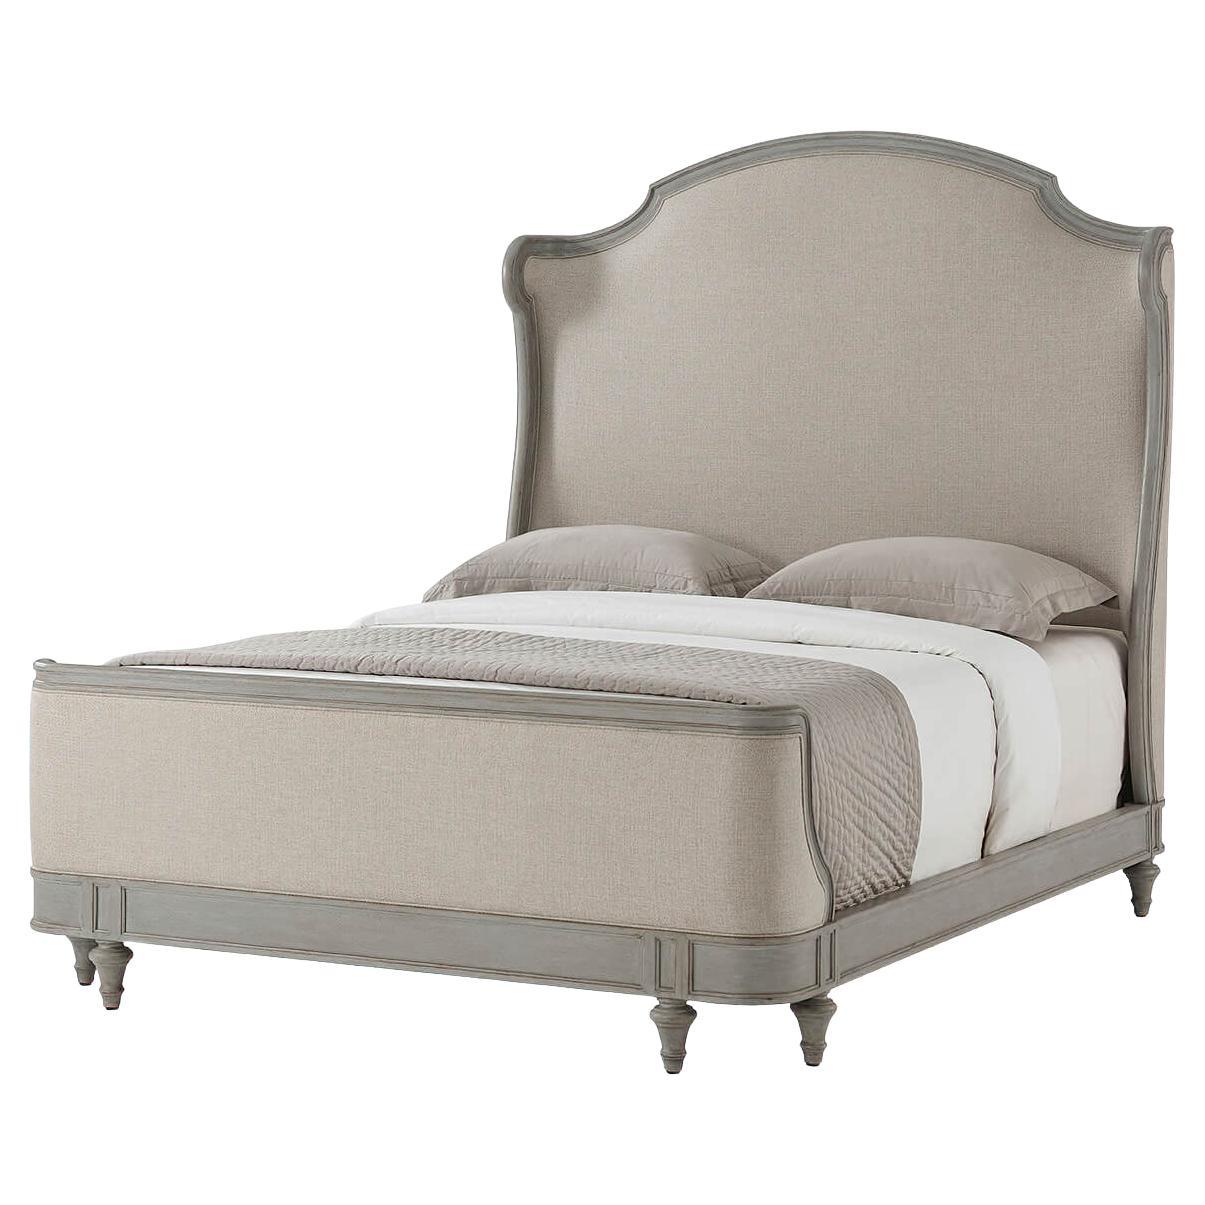 Provincial Painted Queen Size Bed